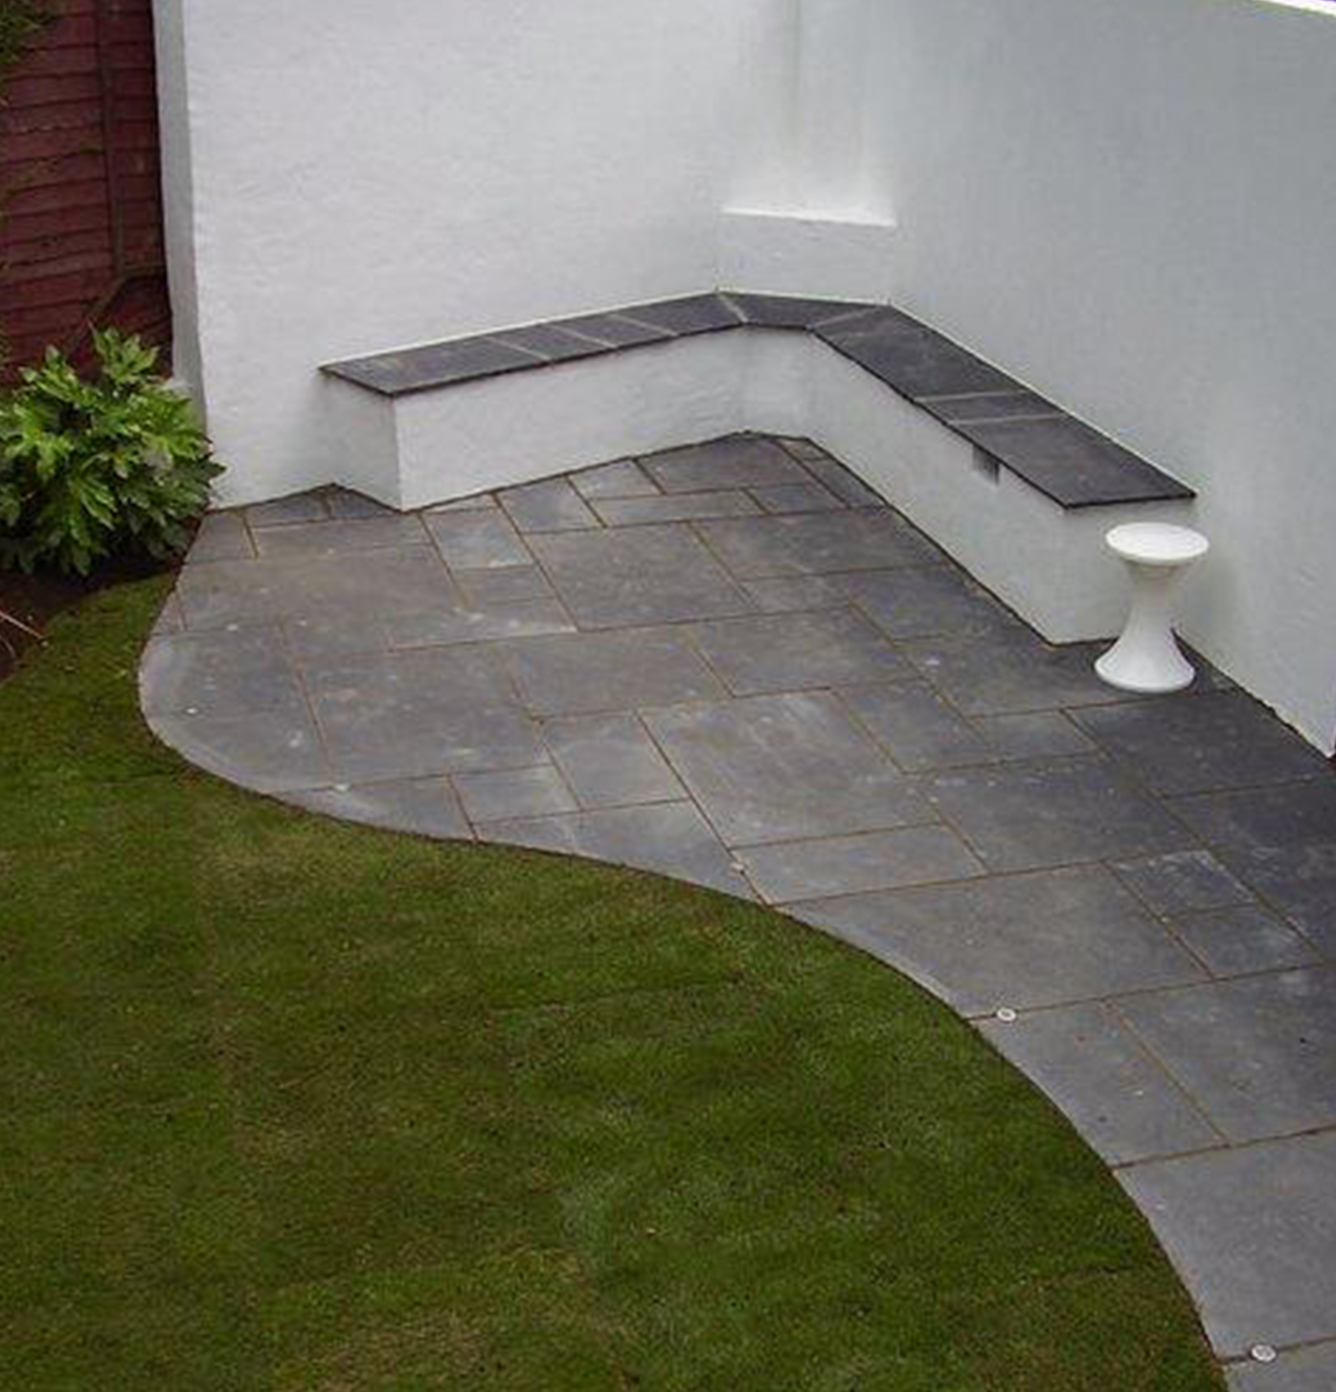 Driveways and Patios in St Albans